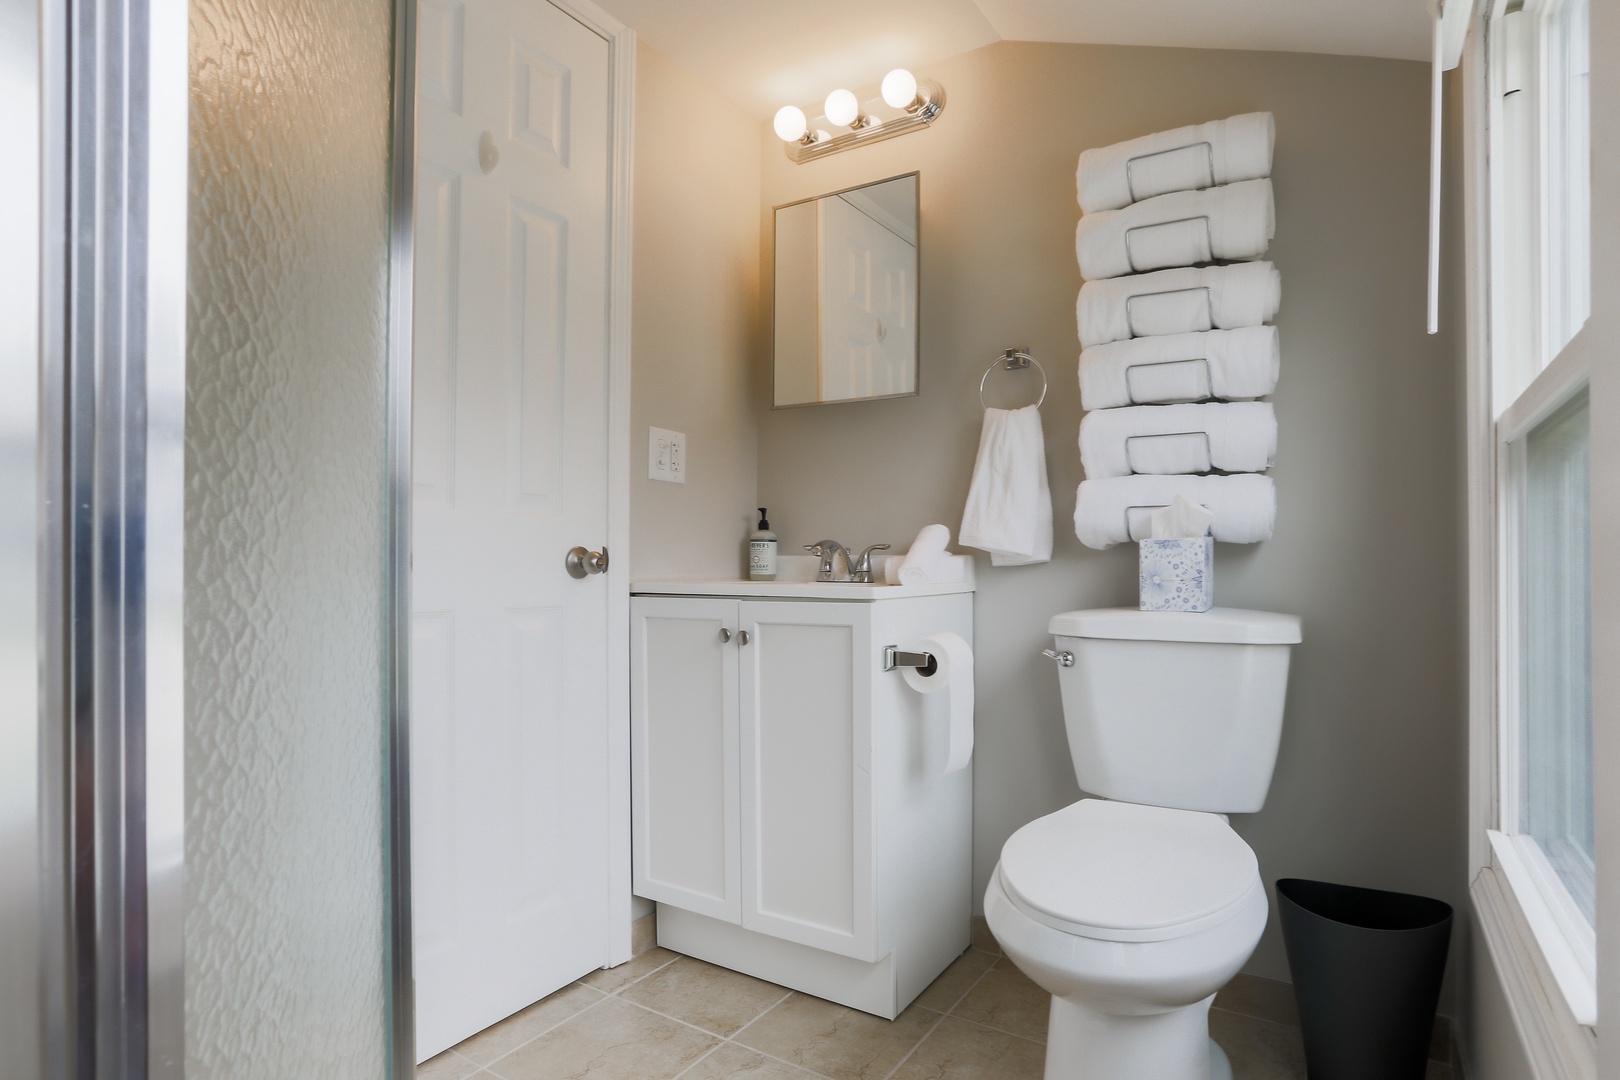 The 2nd floor full bathroom offers a single vanity and glass-enclosed shower